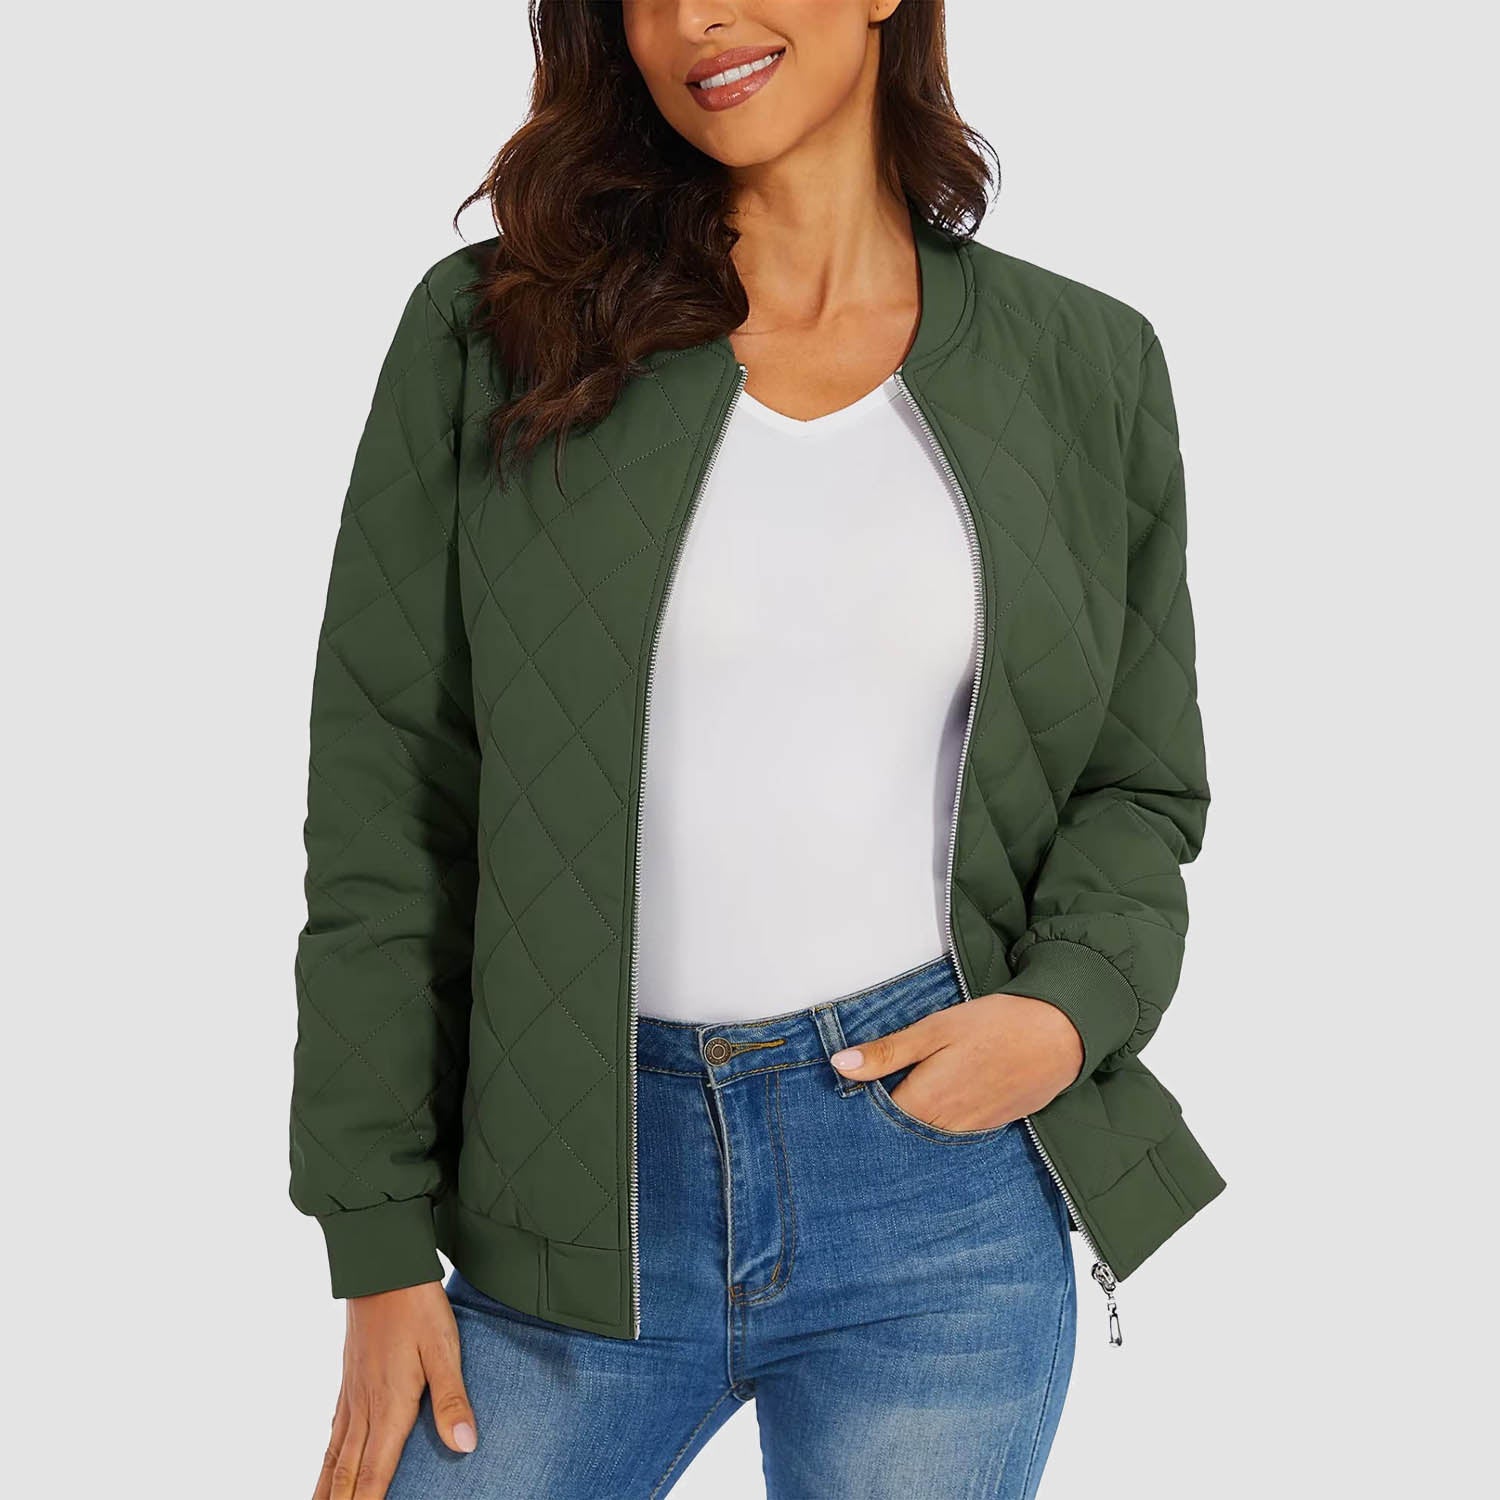 Women's Quilted Jackets Bomber Jacket with 2 Zip Pockets Puffer Casual Winter Jacket